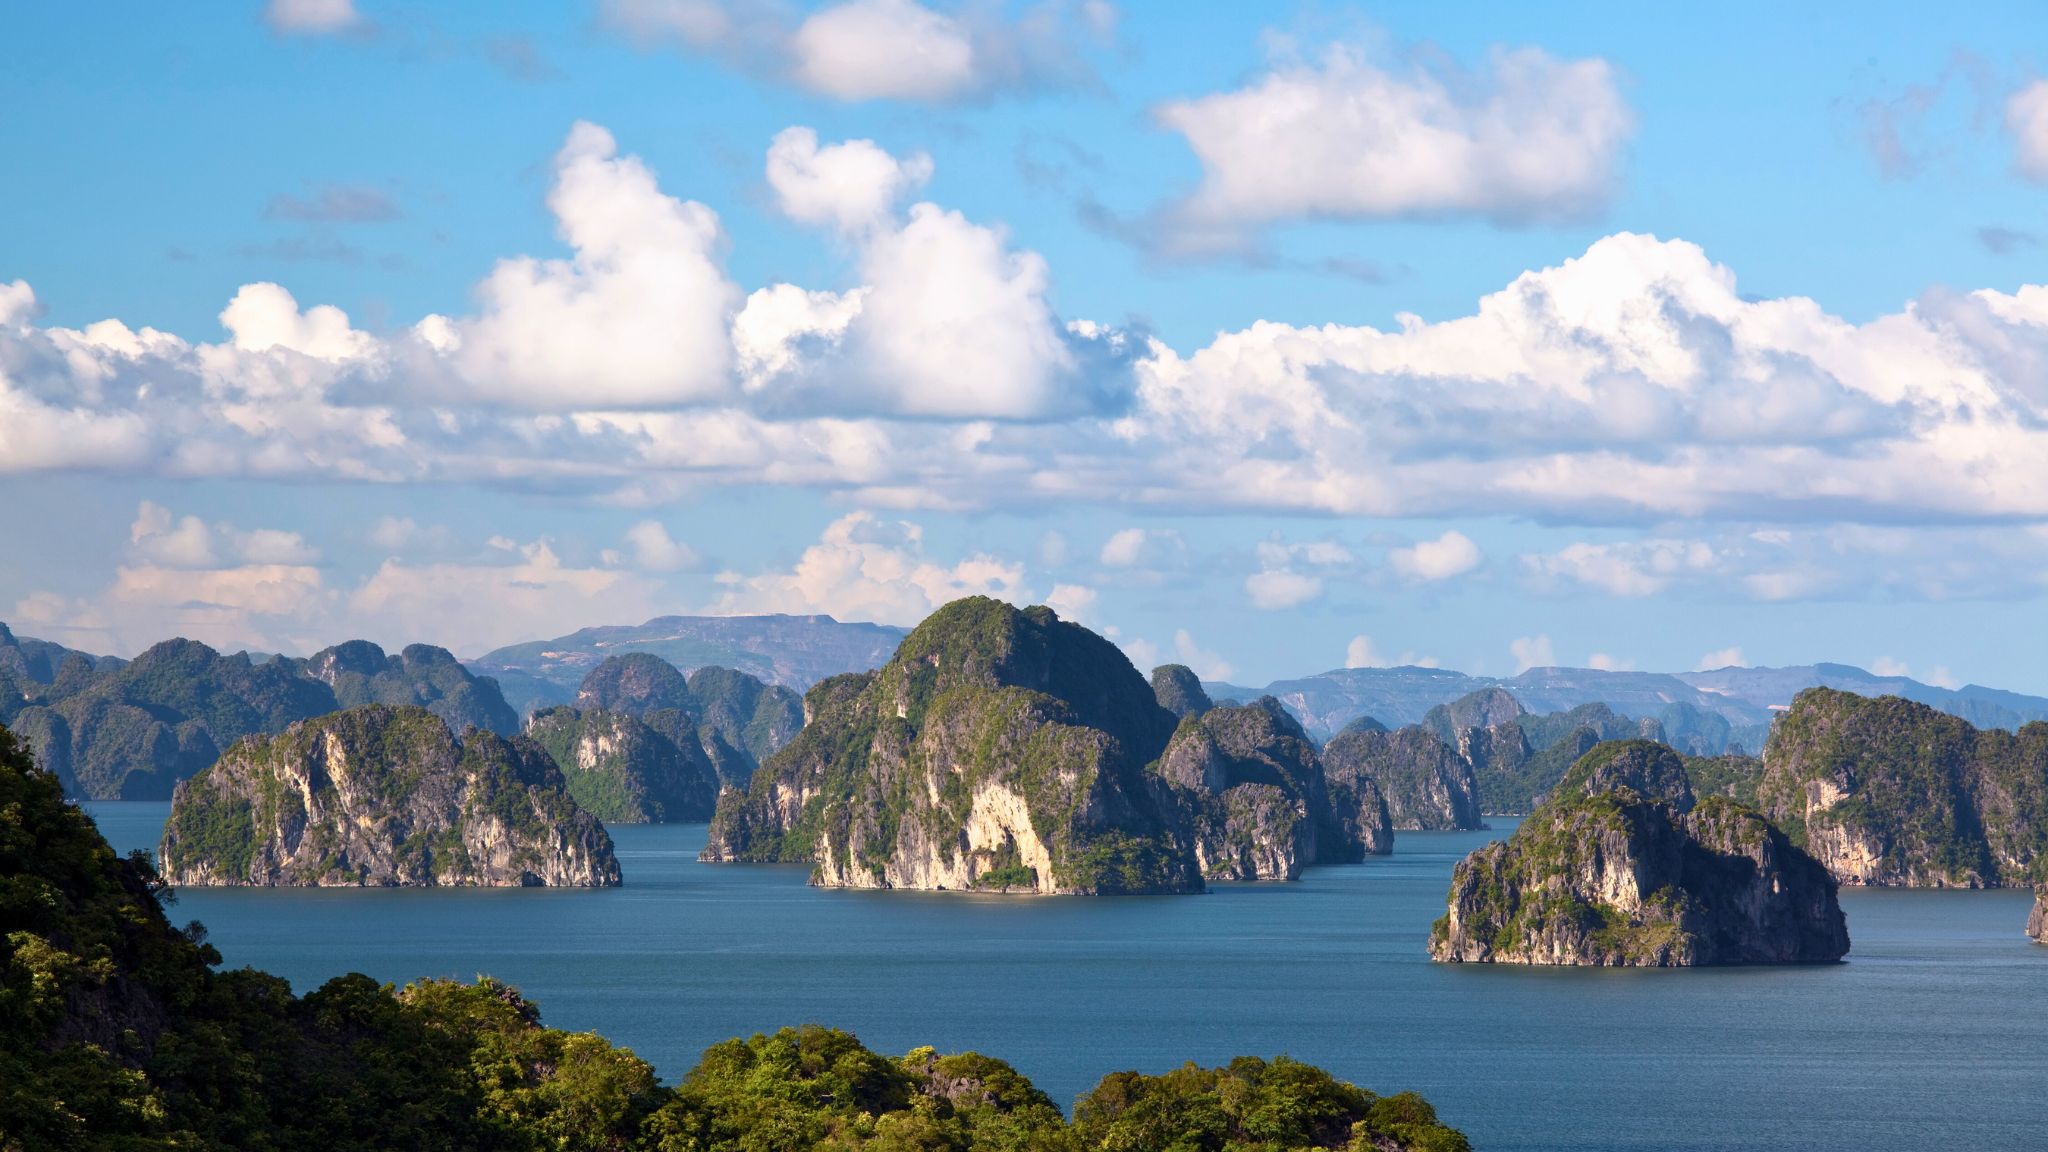 Day 3 Admire The Incredible Beauty Of Halong Bay